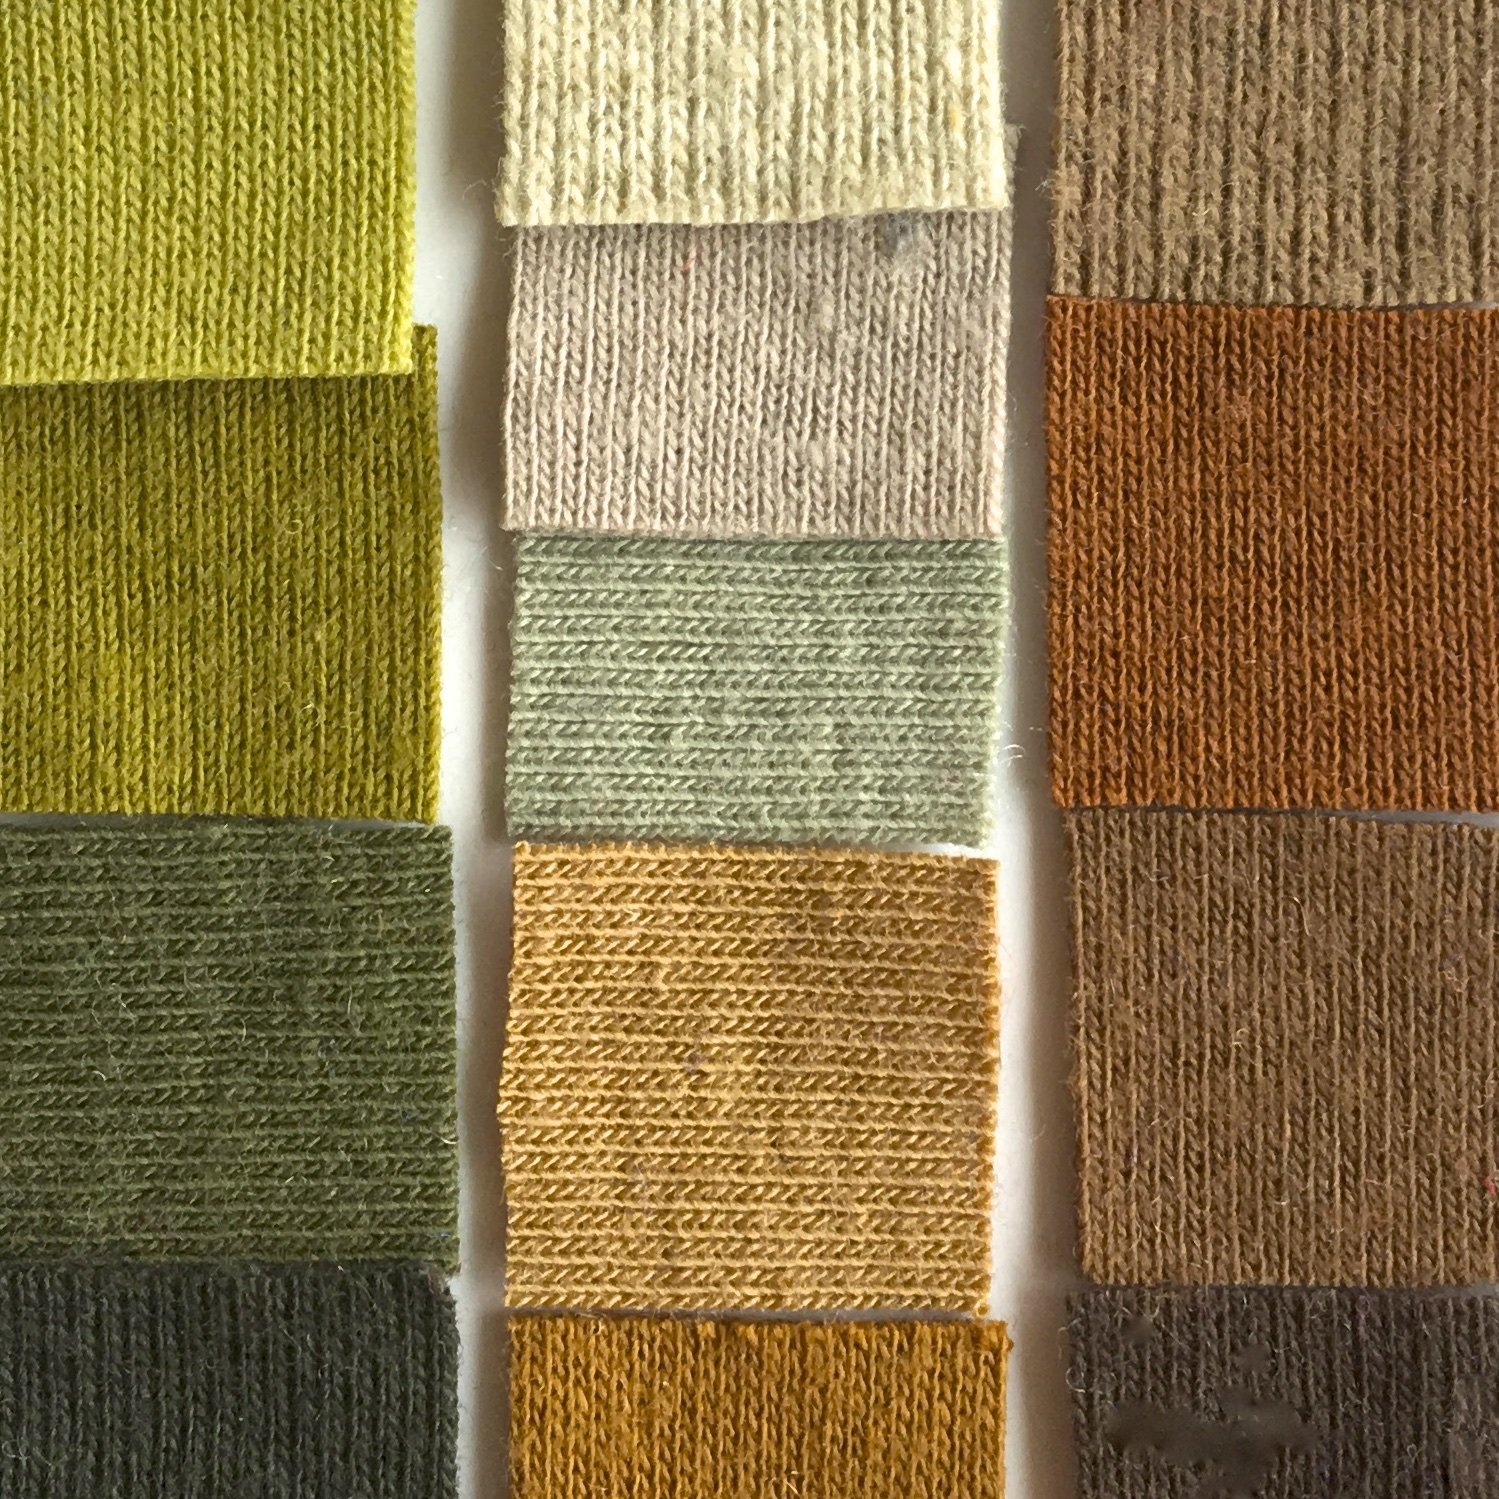 MOSSY GREENS, HEATHER TANS, BROWNS &amp; ECRU Organic Color Group for JoJoCo Hatmakers of Chicago